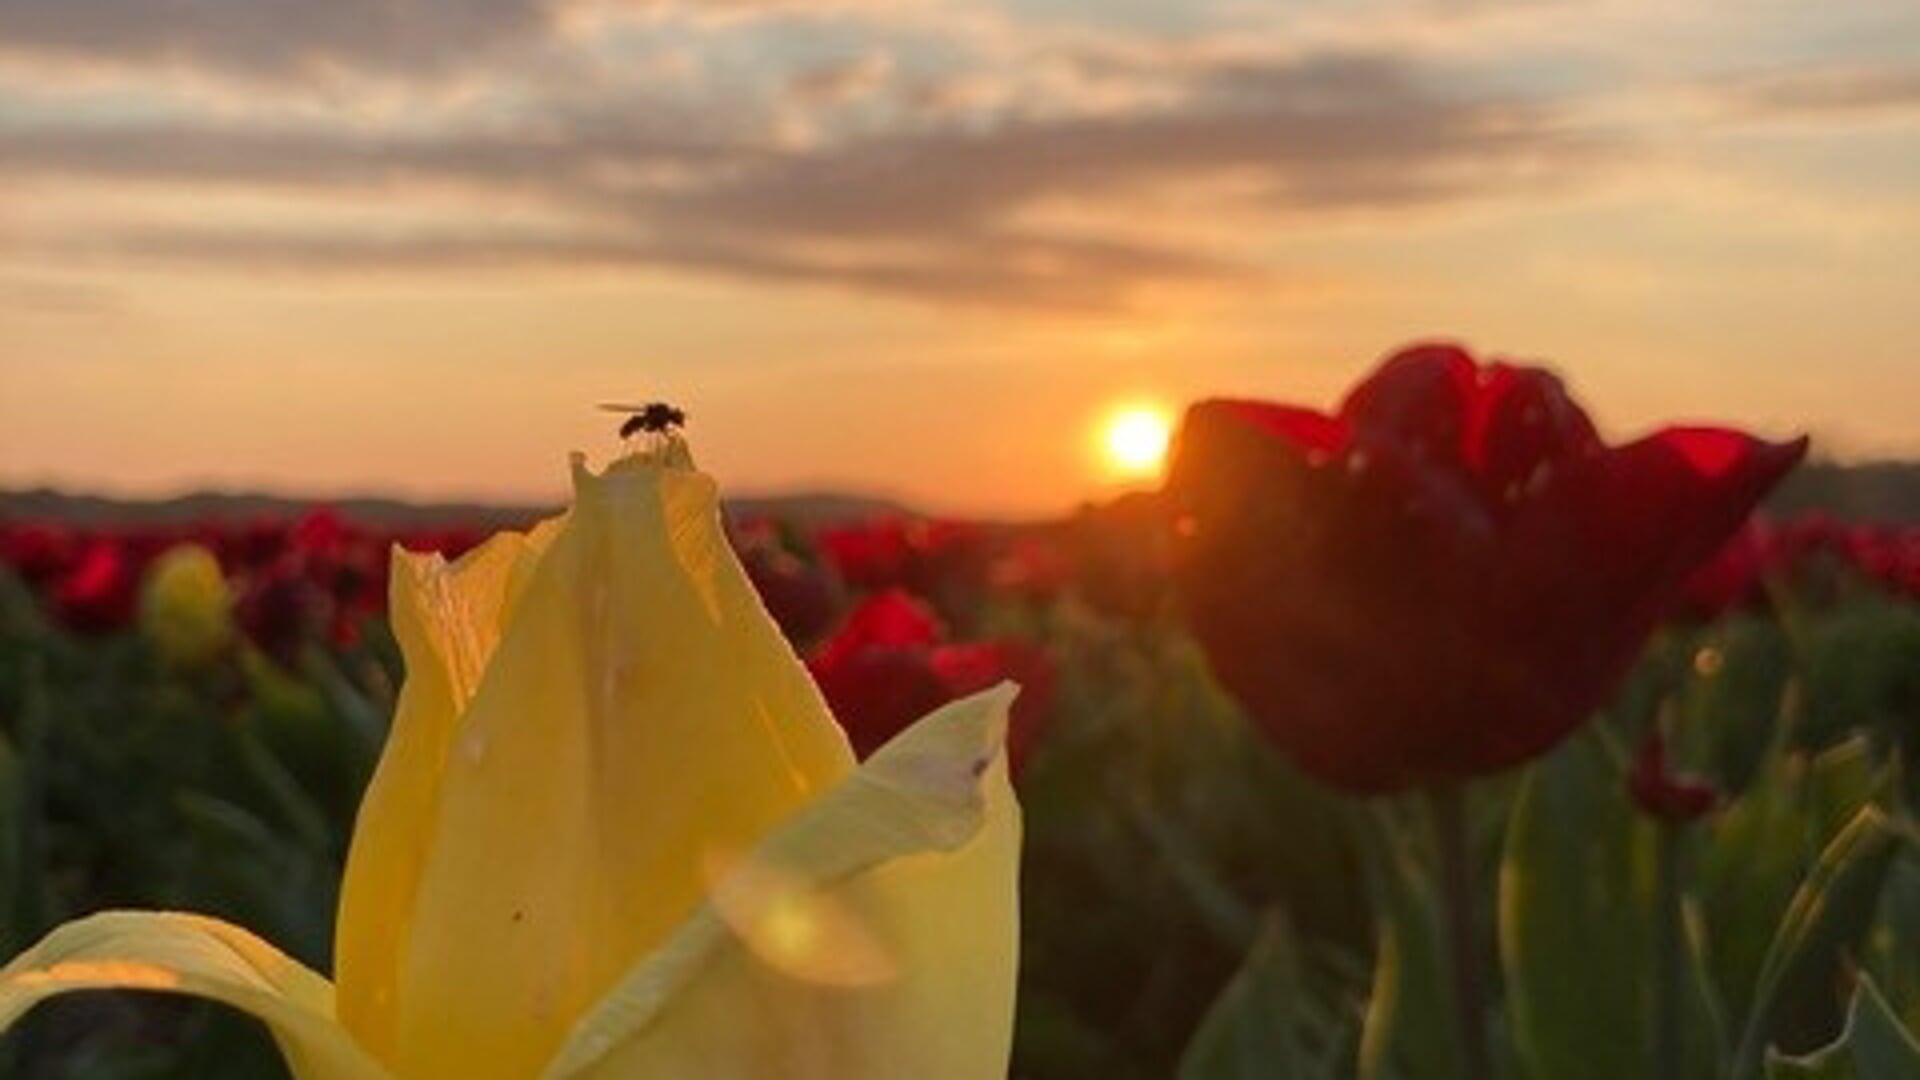 Insect op tulp.